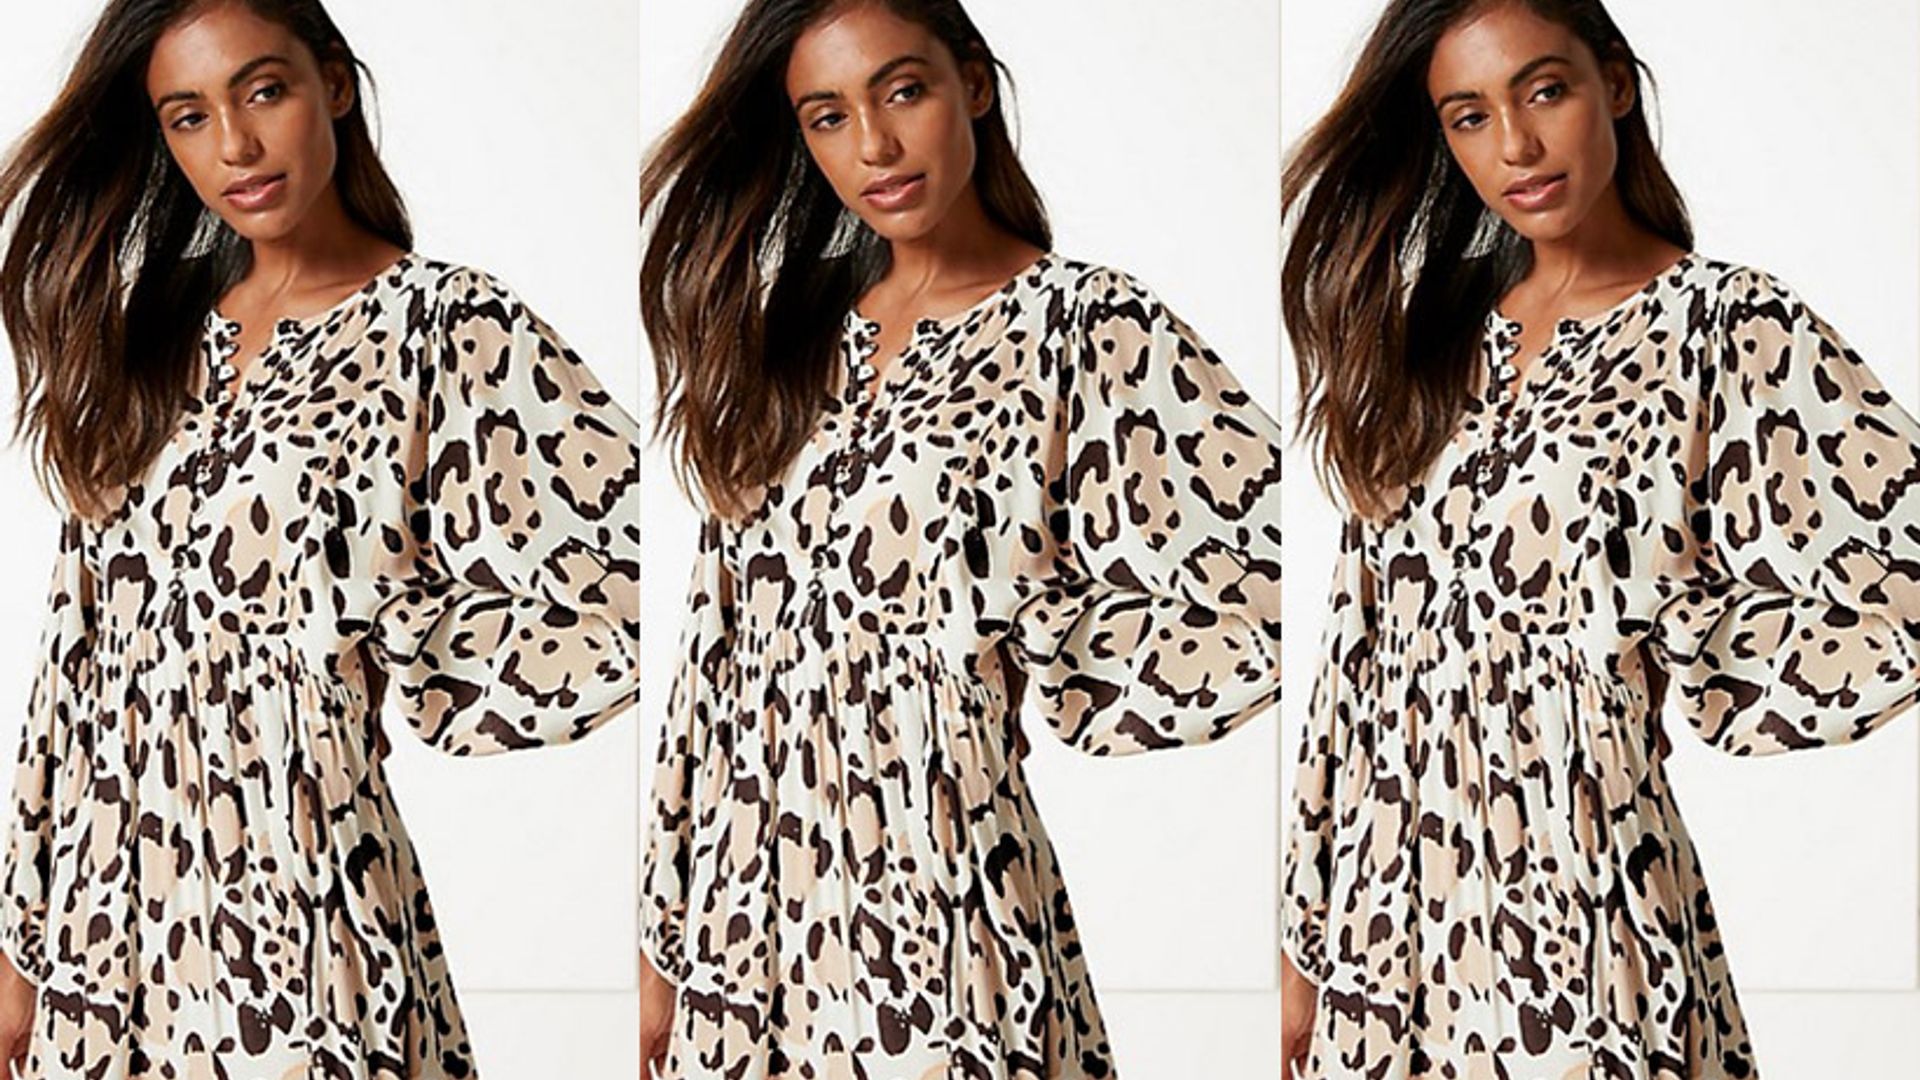 marks and spencer leopard dress erica davies